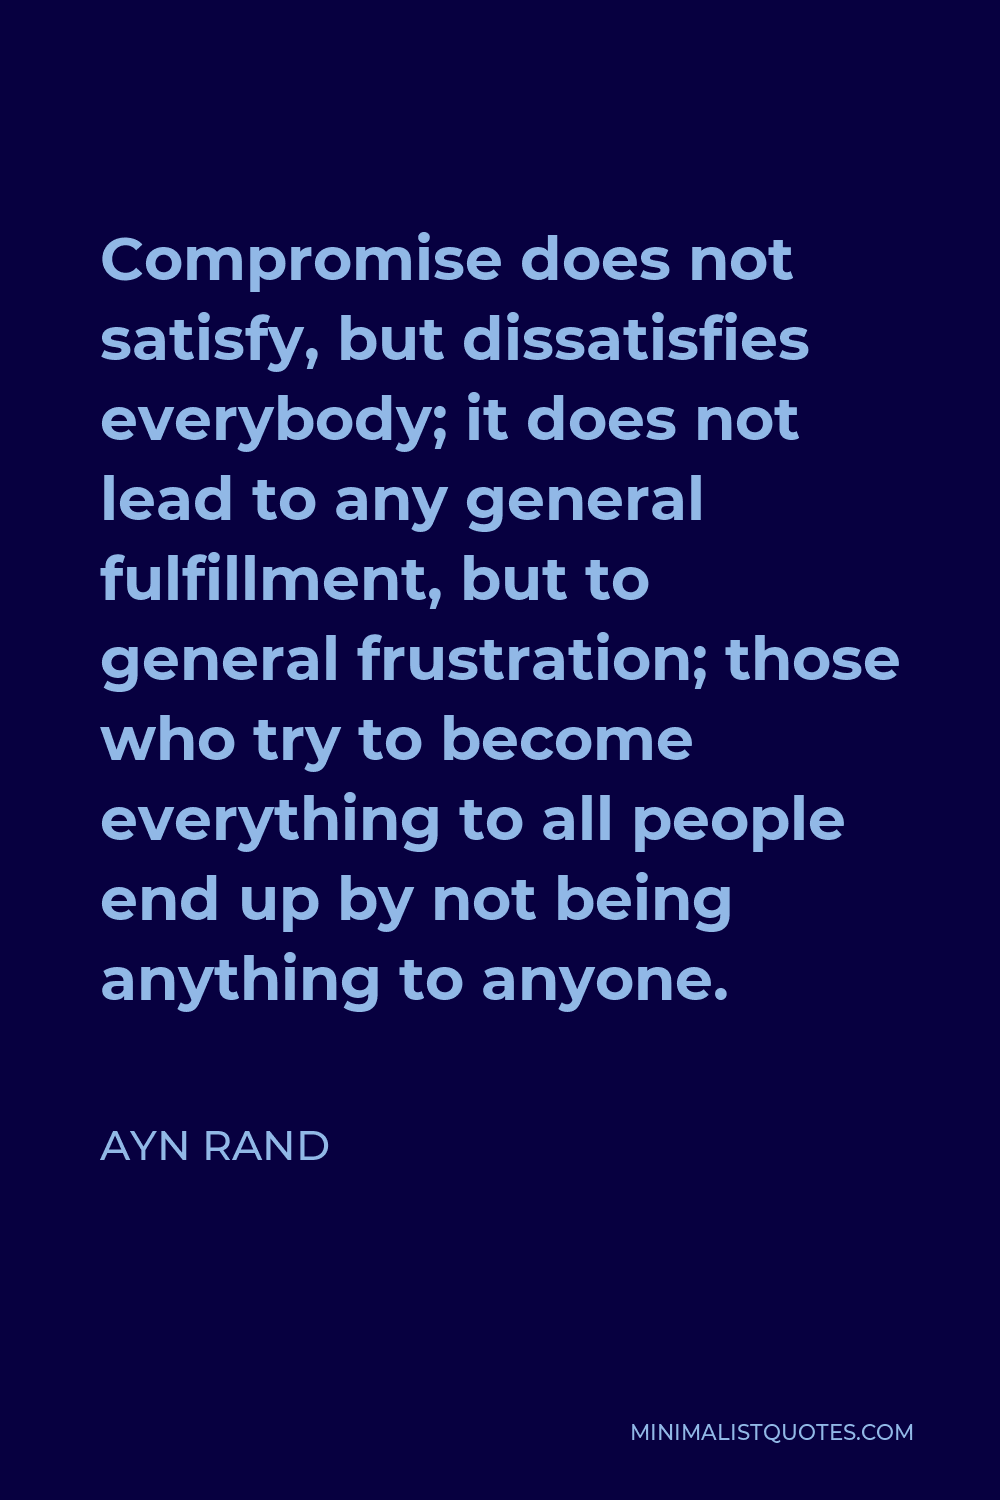 Ayn Rand Quote - Compromise does not satisfy, but dissatisfies everybody; it does not lead to any general fulfillment, but to general frustration; those who try to become everything to all people end up by not being anything to anyone.